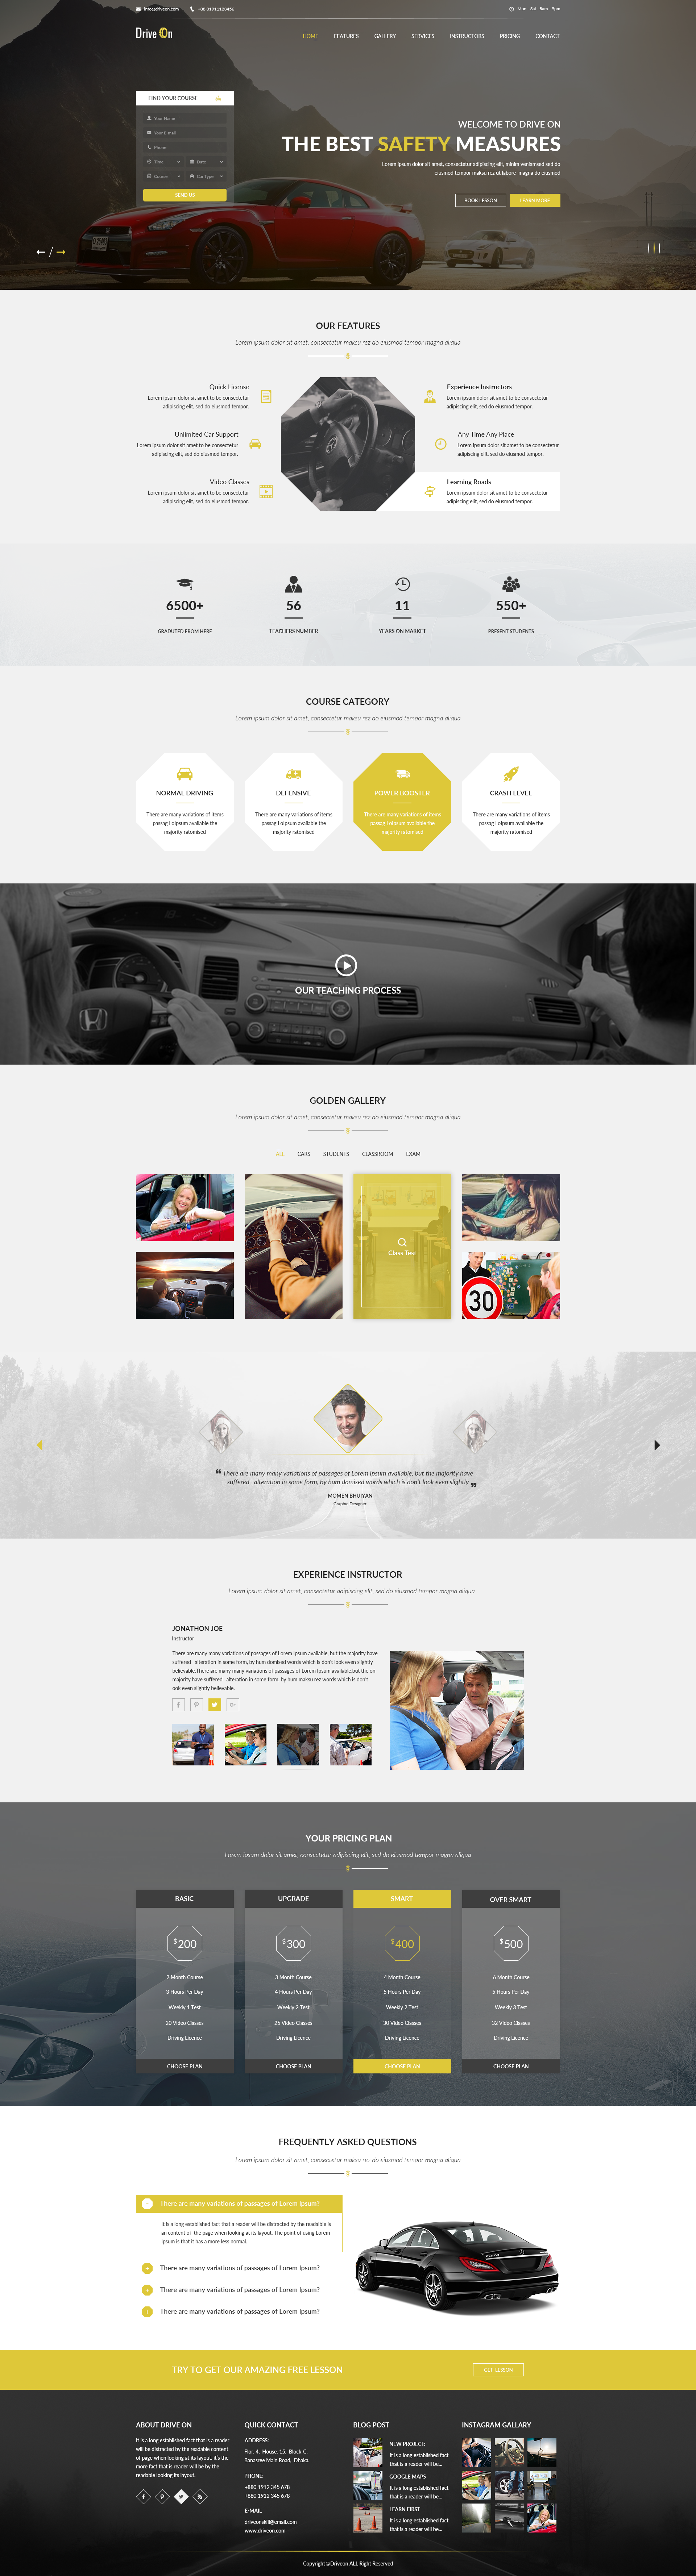 Download Driveon Driving School Psd Template By Themes Hub Themeforest PSD Mockup Templates